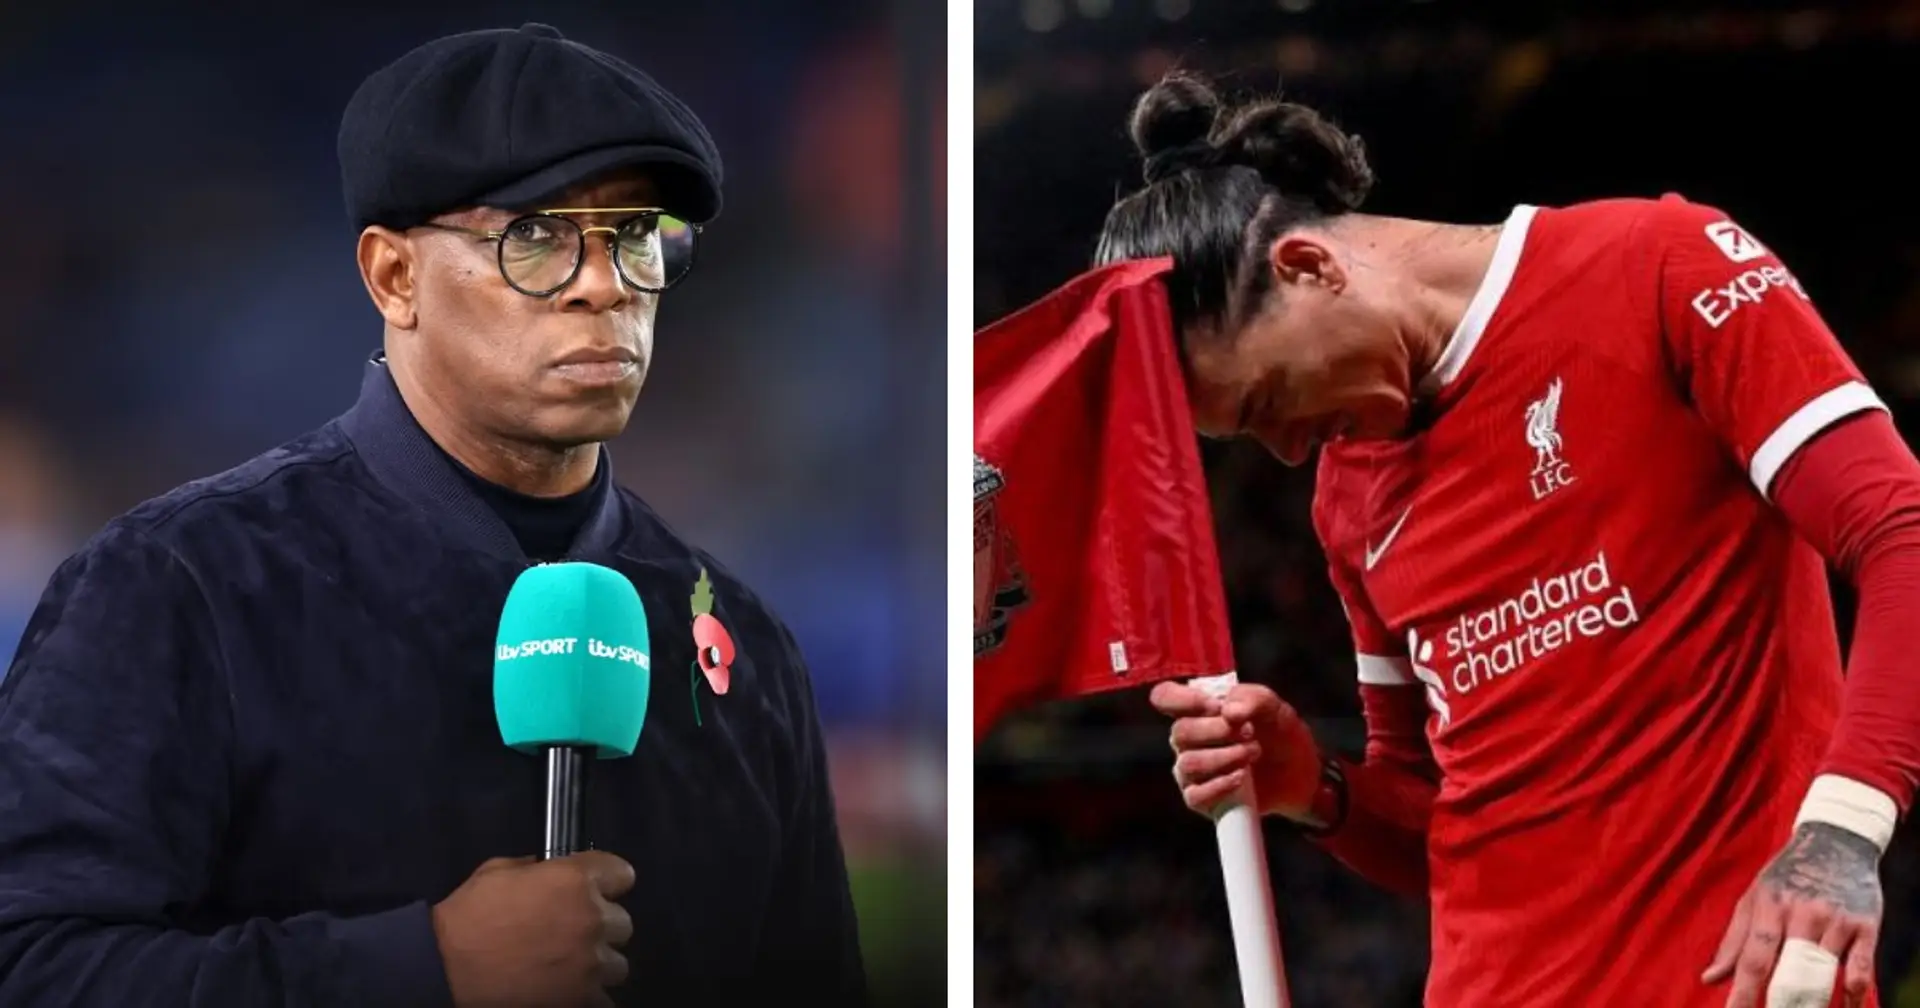 Ian Wright says Darwin Nunez did something 'unforgivable' in Liverpool's defeat to Palace